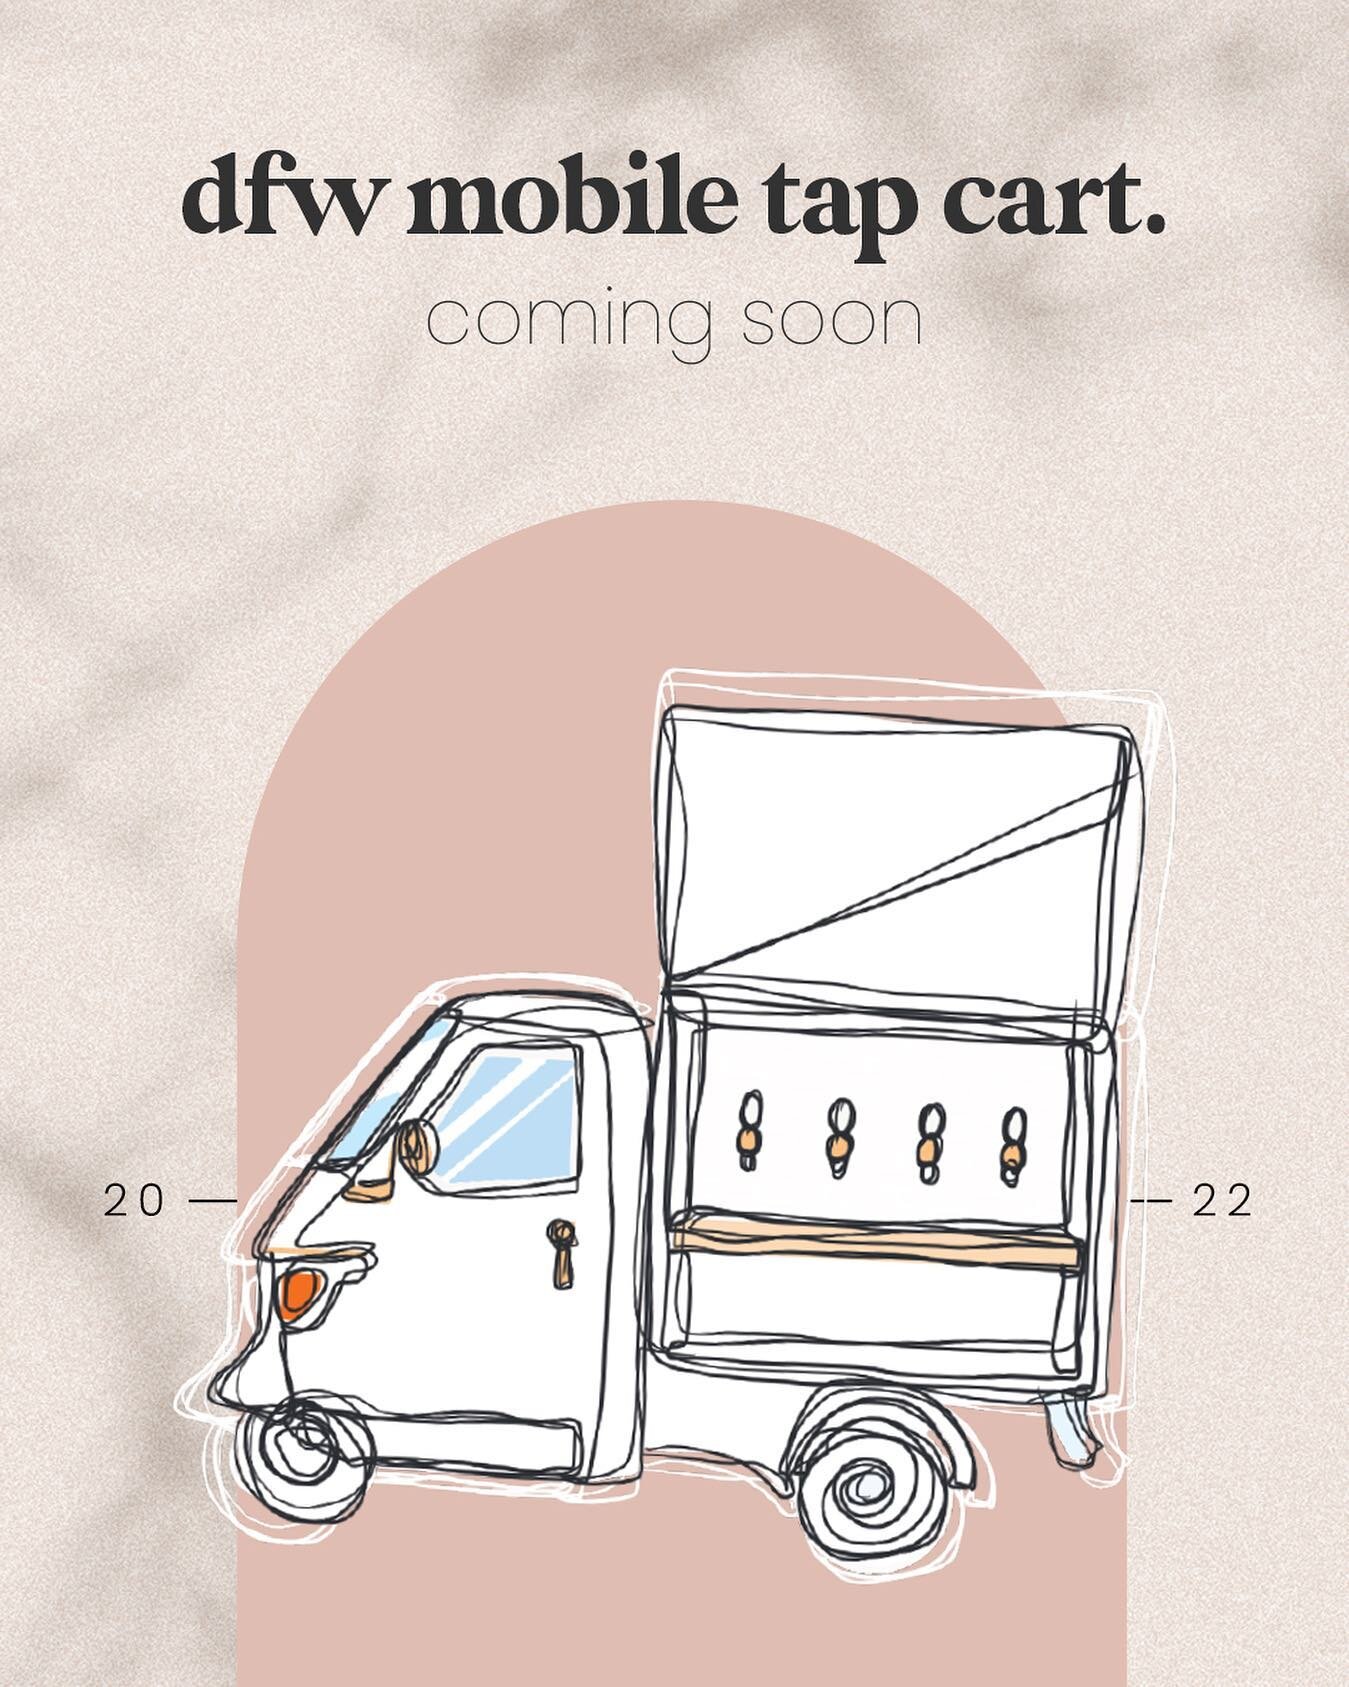 COMING SOON - If The Tap Fits Mobile Tap Cart. 🚛✨🍾

Let us build you a custom event rental package and WOW your guests through this unique experience!

Alcoholic or Non-alcoholic. Chilled or Hot. You name it! If the tap fits, we got you! ☕️🧋🍺🥂🍷